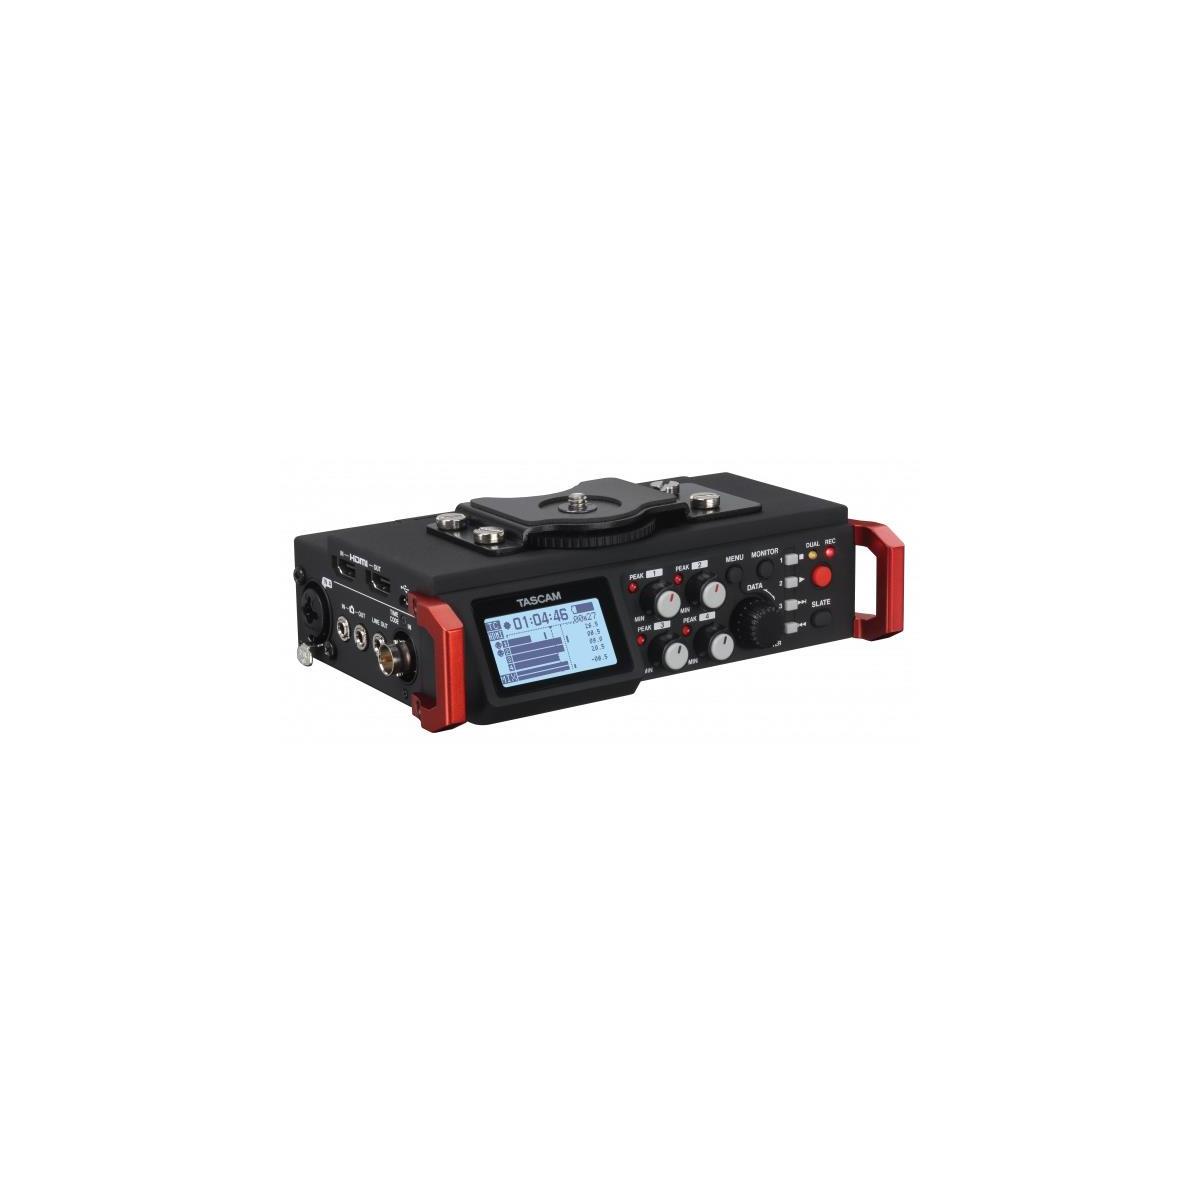 6-Track Field Recorder for DSLR Camera with SMPTE Timecode - Tascam DR-701D